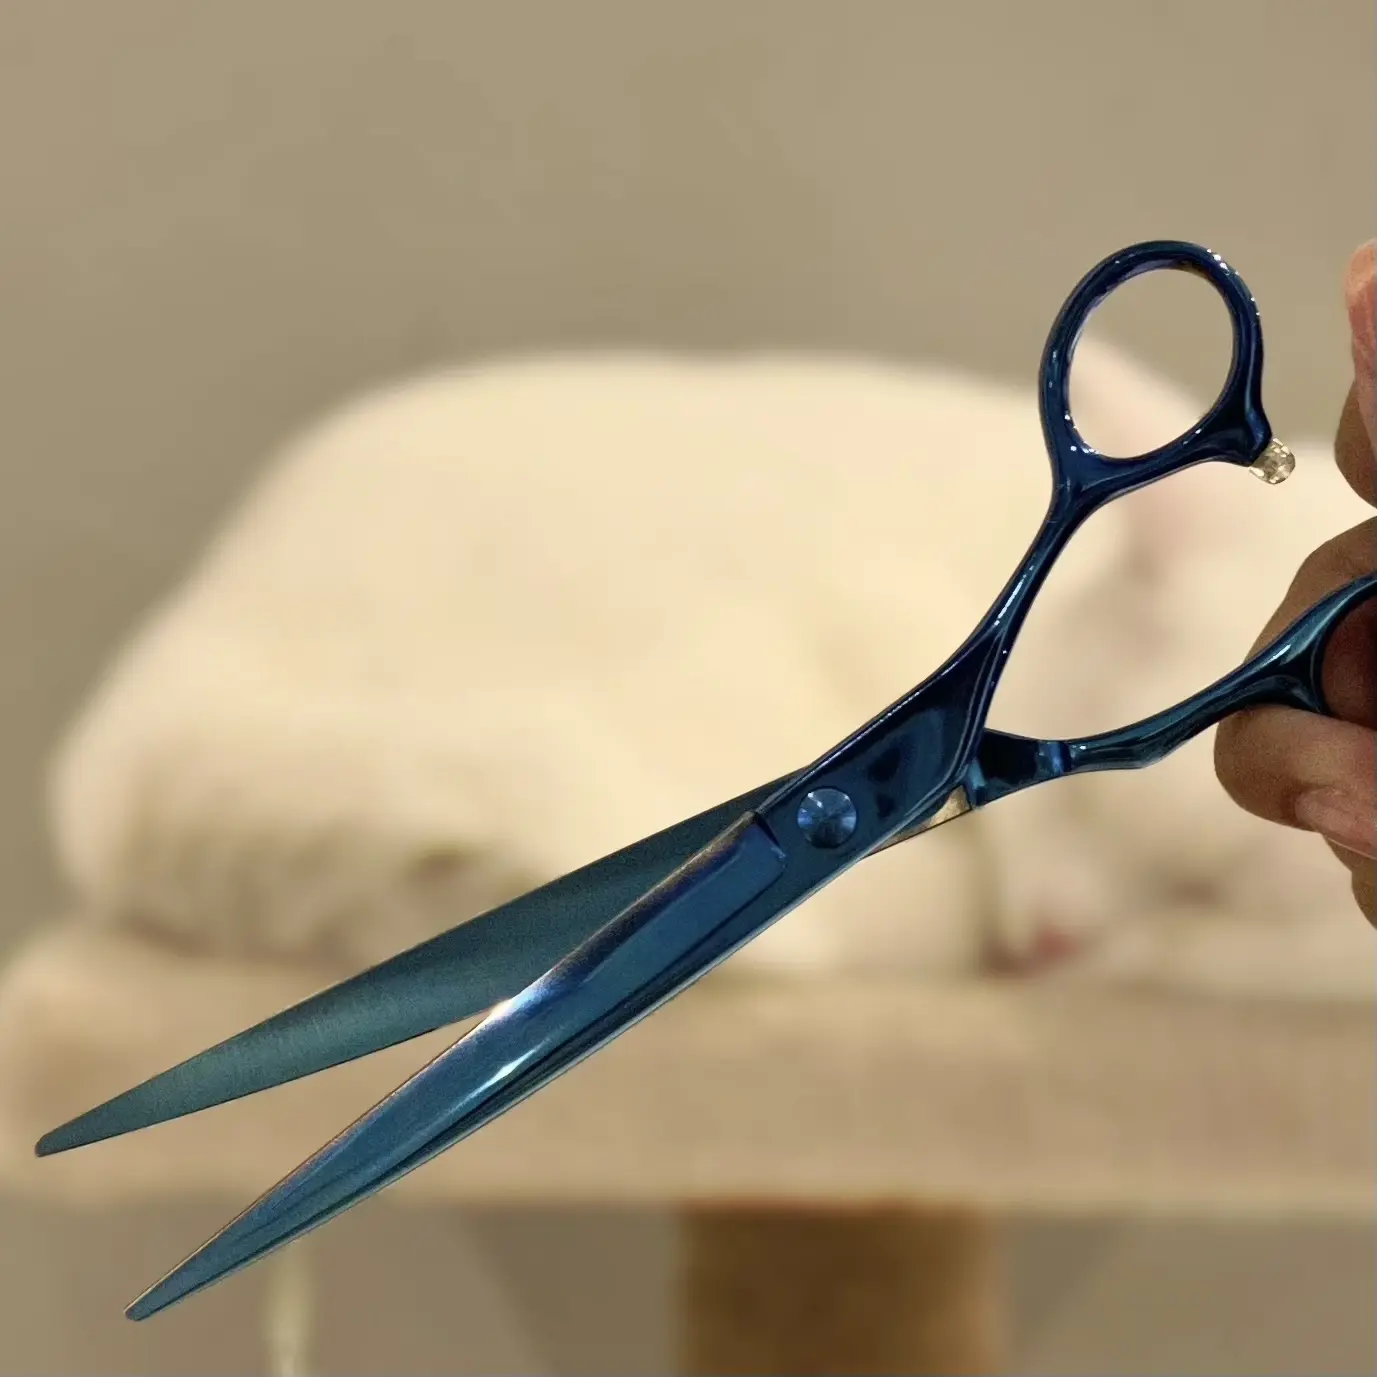 7 Inch Taiwan Curved Scissors Dog Grooming